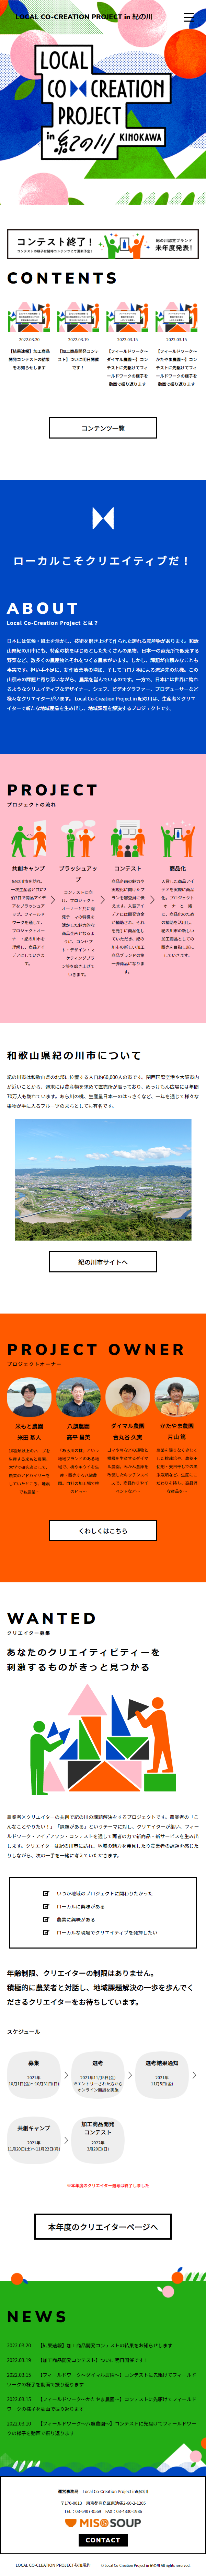 Local Co-Creation Project in紀の川_sp_1